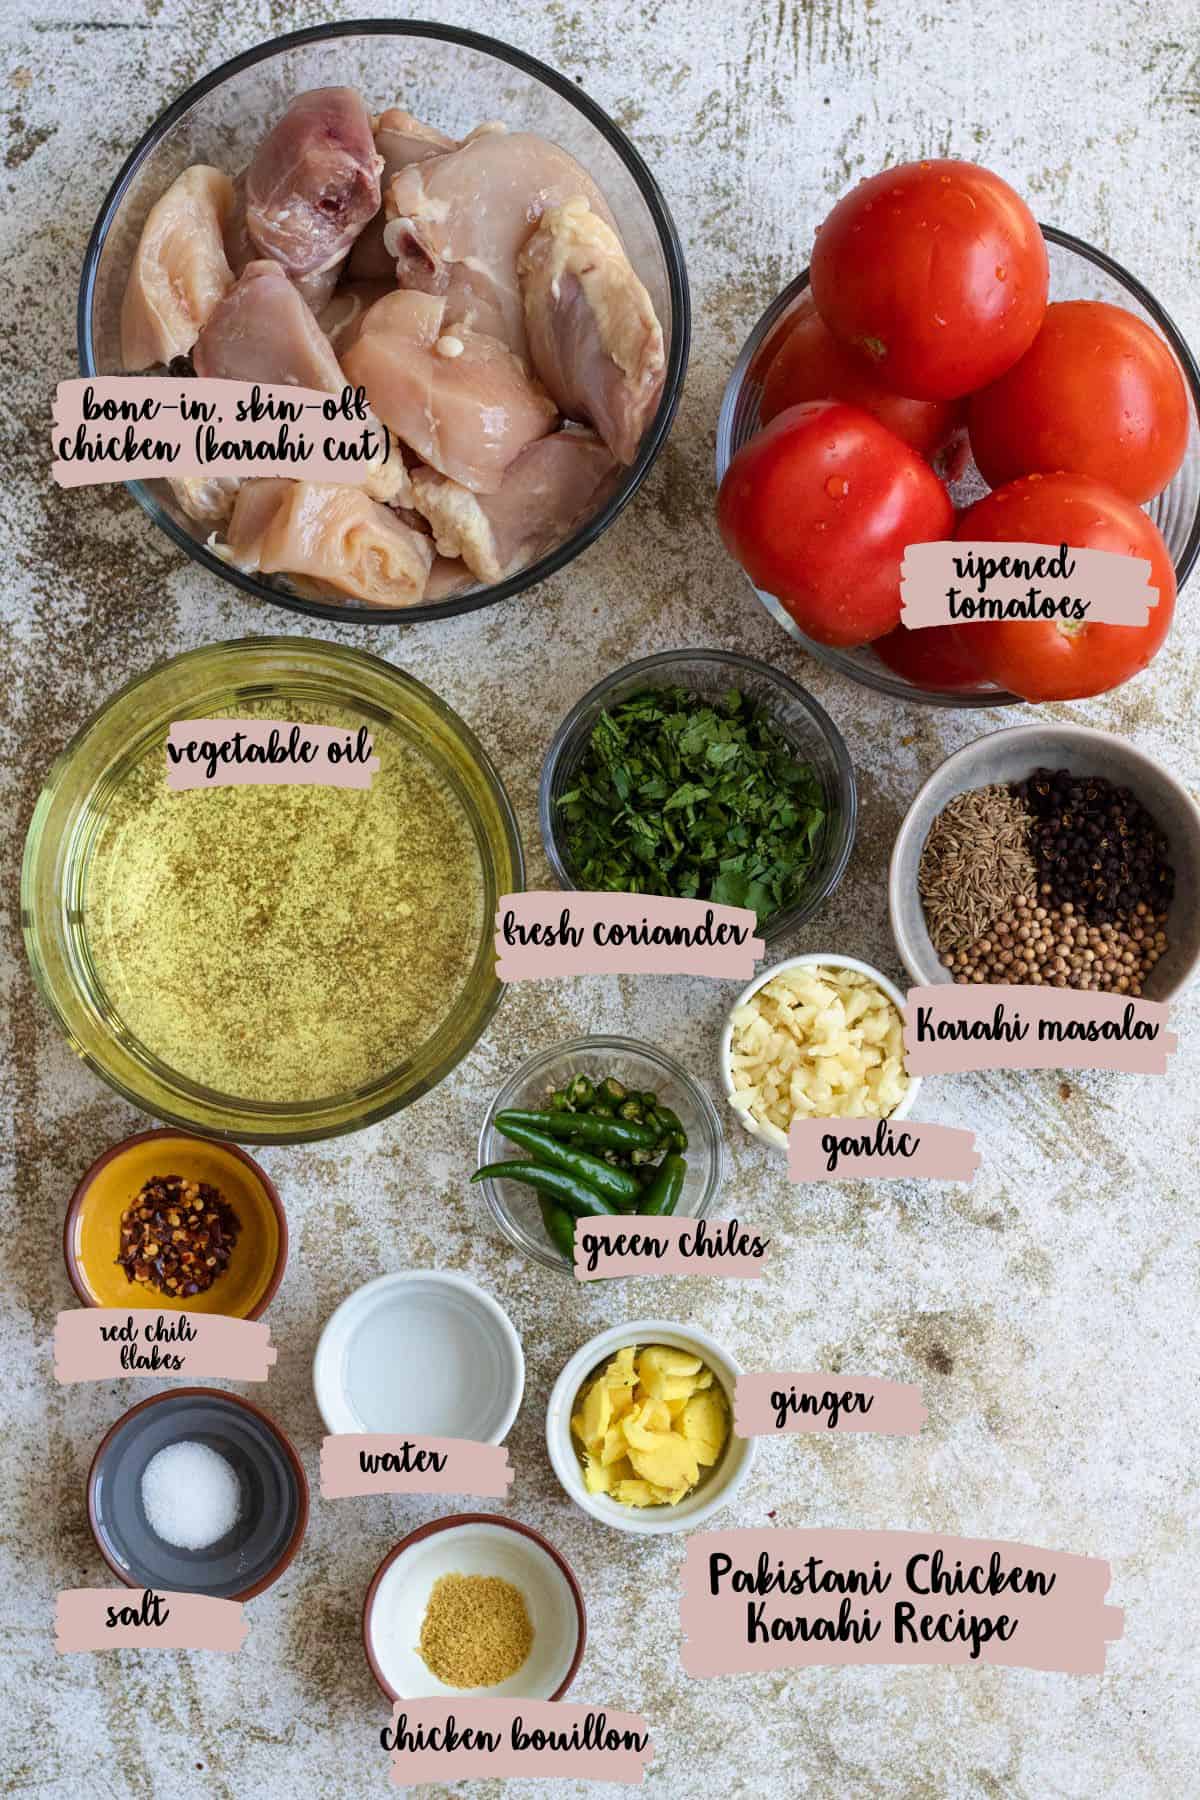 Ingredients shown with labels of all the ingredients used in preparing Pakistani Chicken Karahi recipe. 